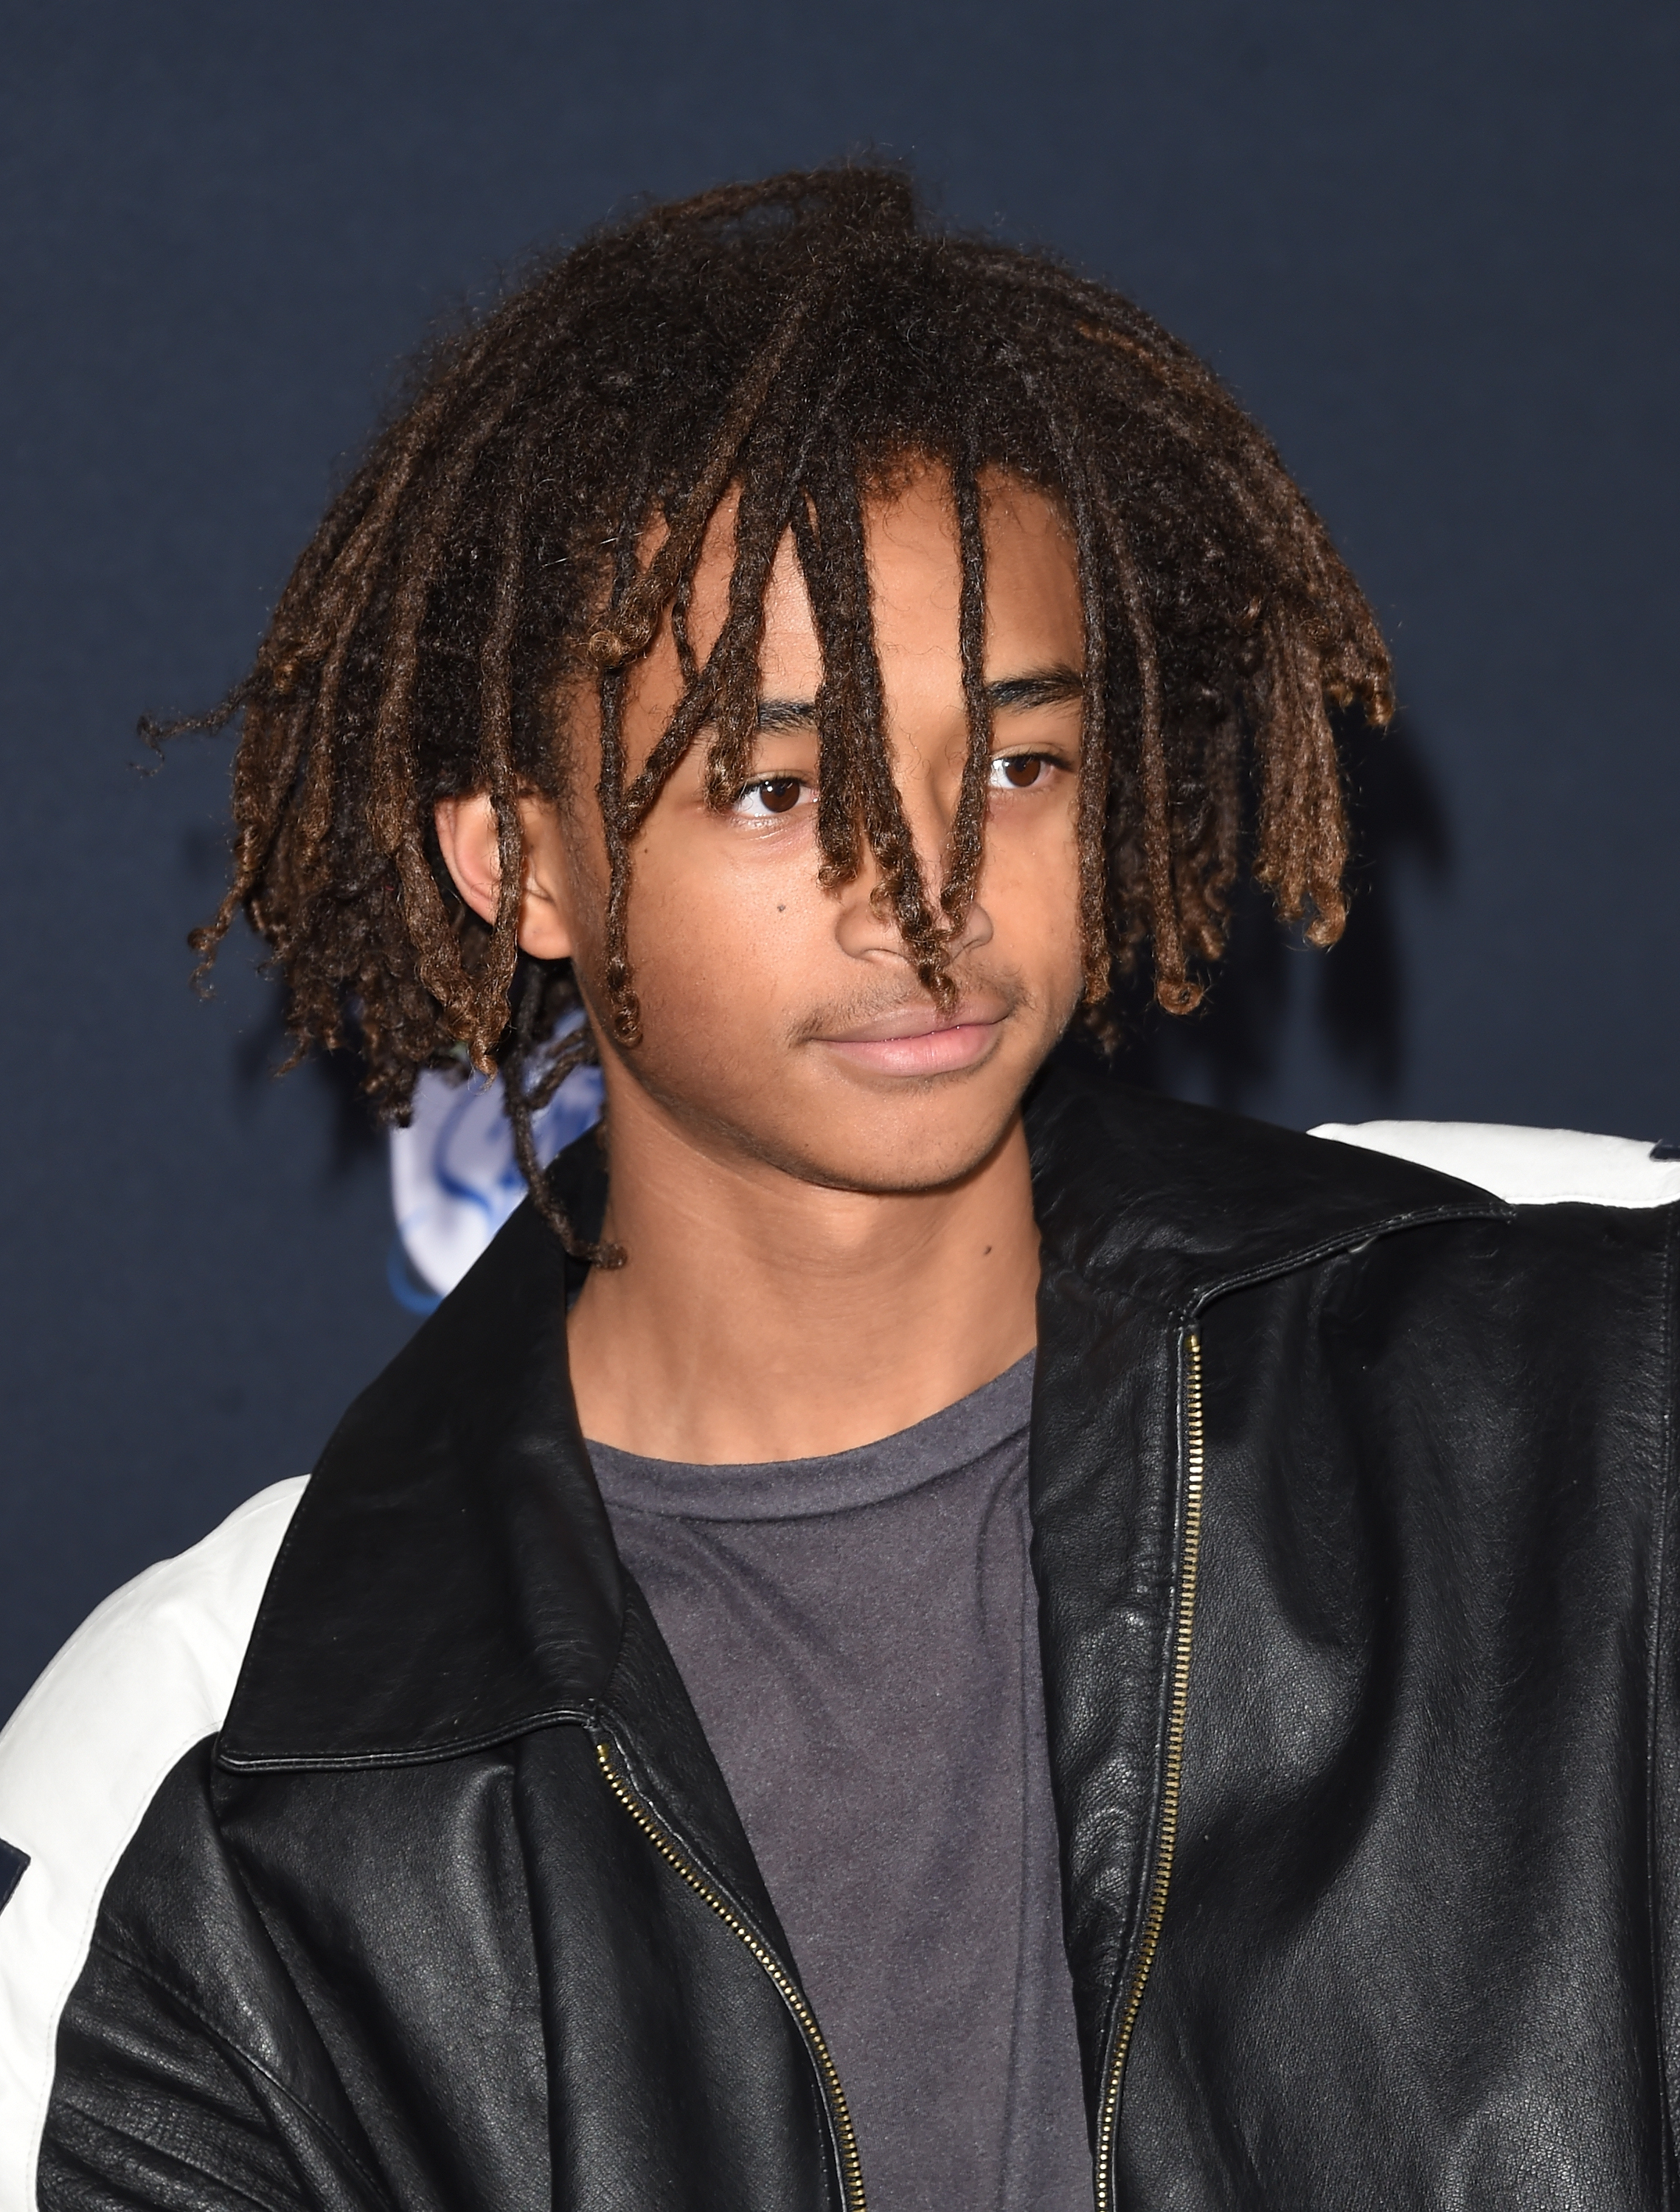 Jaden Smith's Latest Outfit Was Super Basic (If Your Name Is Jaden